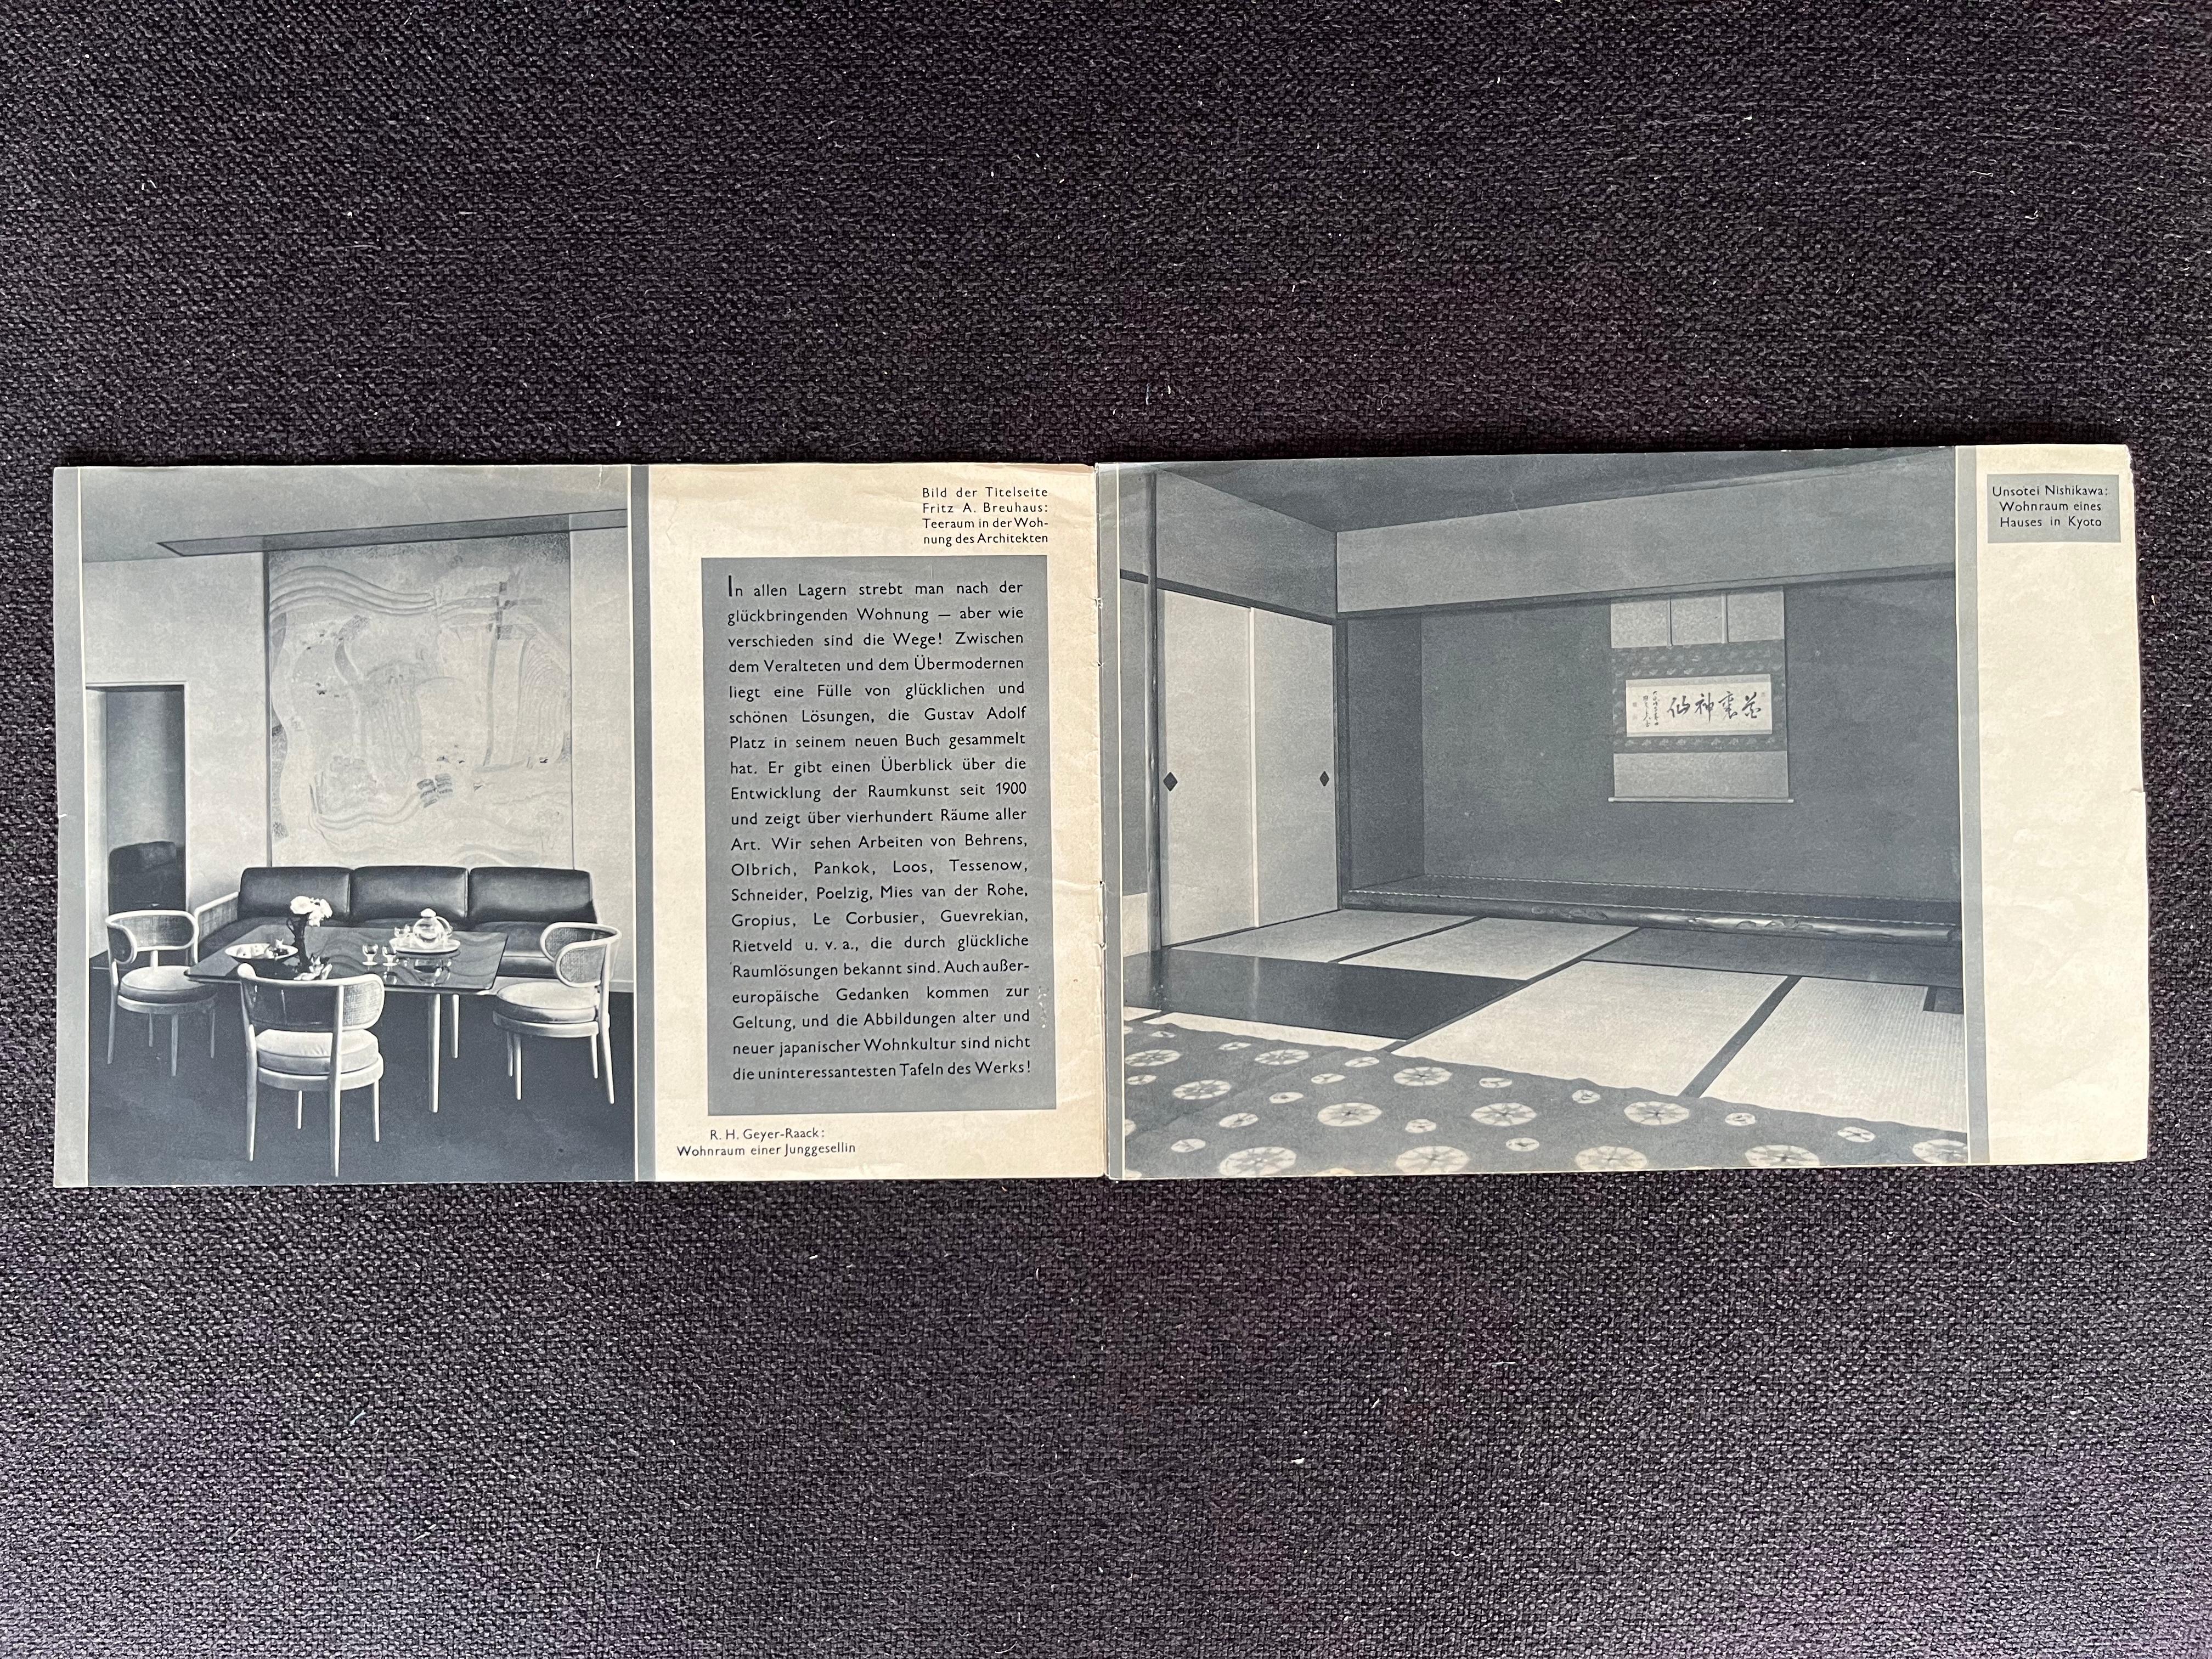 - 1930s.
- By Gustav Adolf Platz.
- 6 pages.
- Tugendhat, Mies van der Rohe, L.Moholy Nagy, Le Corbusier.
- for the condition see the pictures.
- jr.